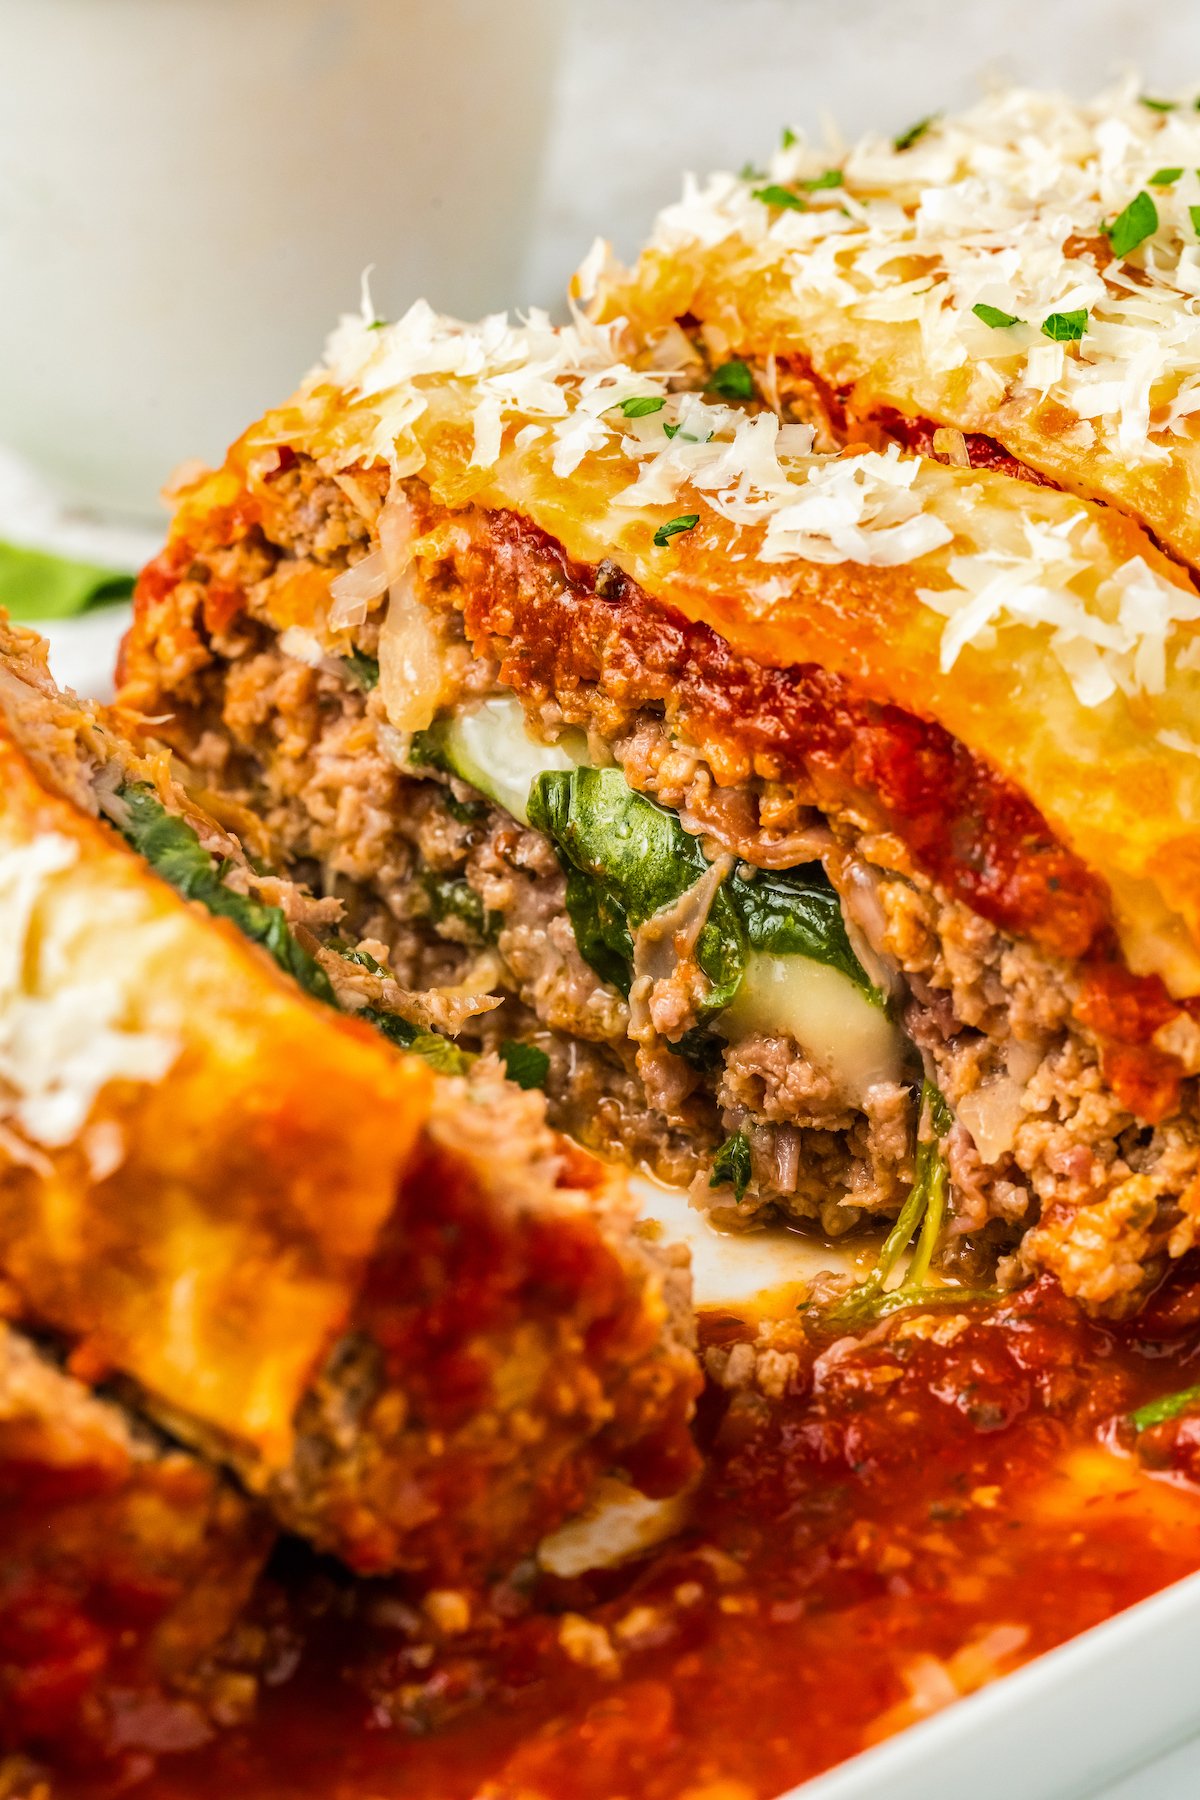 Sliced stuffed Italian meatloaf with lots of melty cheese, spinach, prosciutto and marinara sauce.